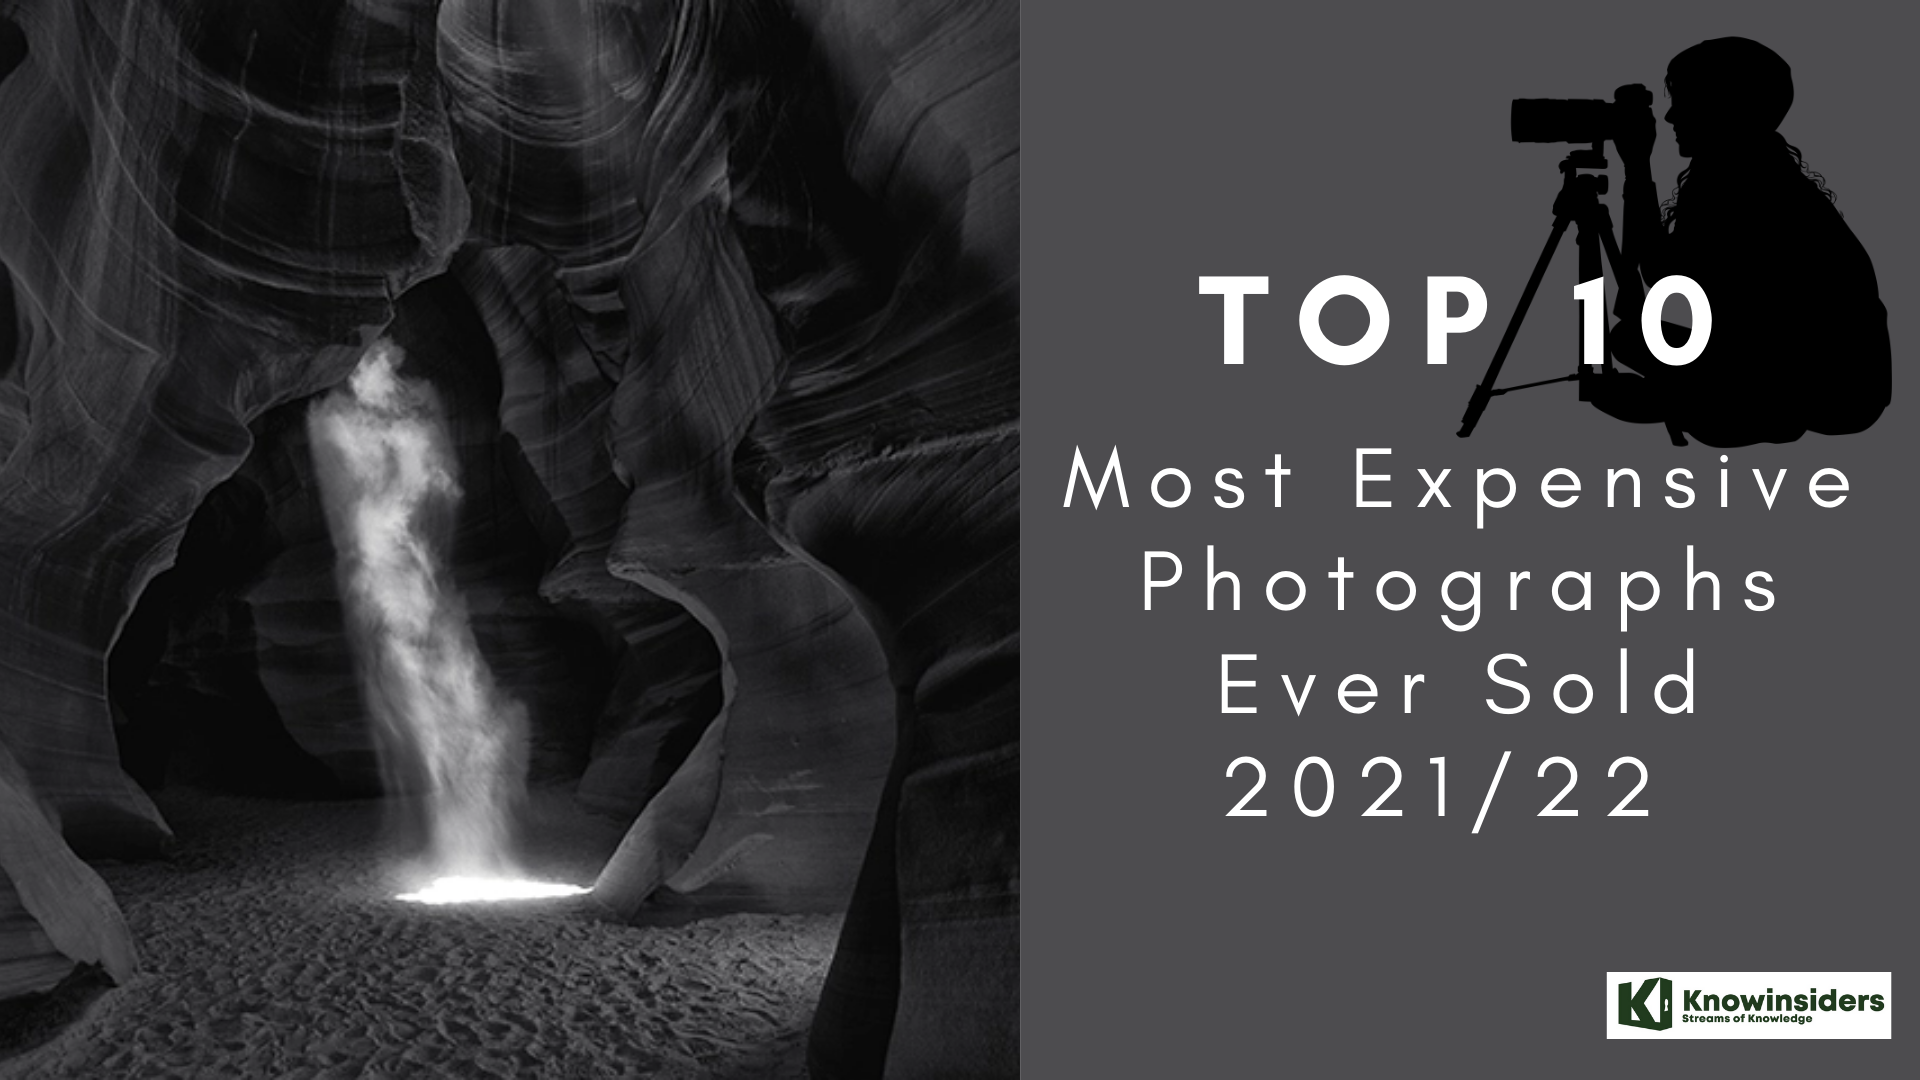 Top 10 most expensive photographs ever sold 